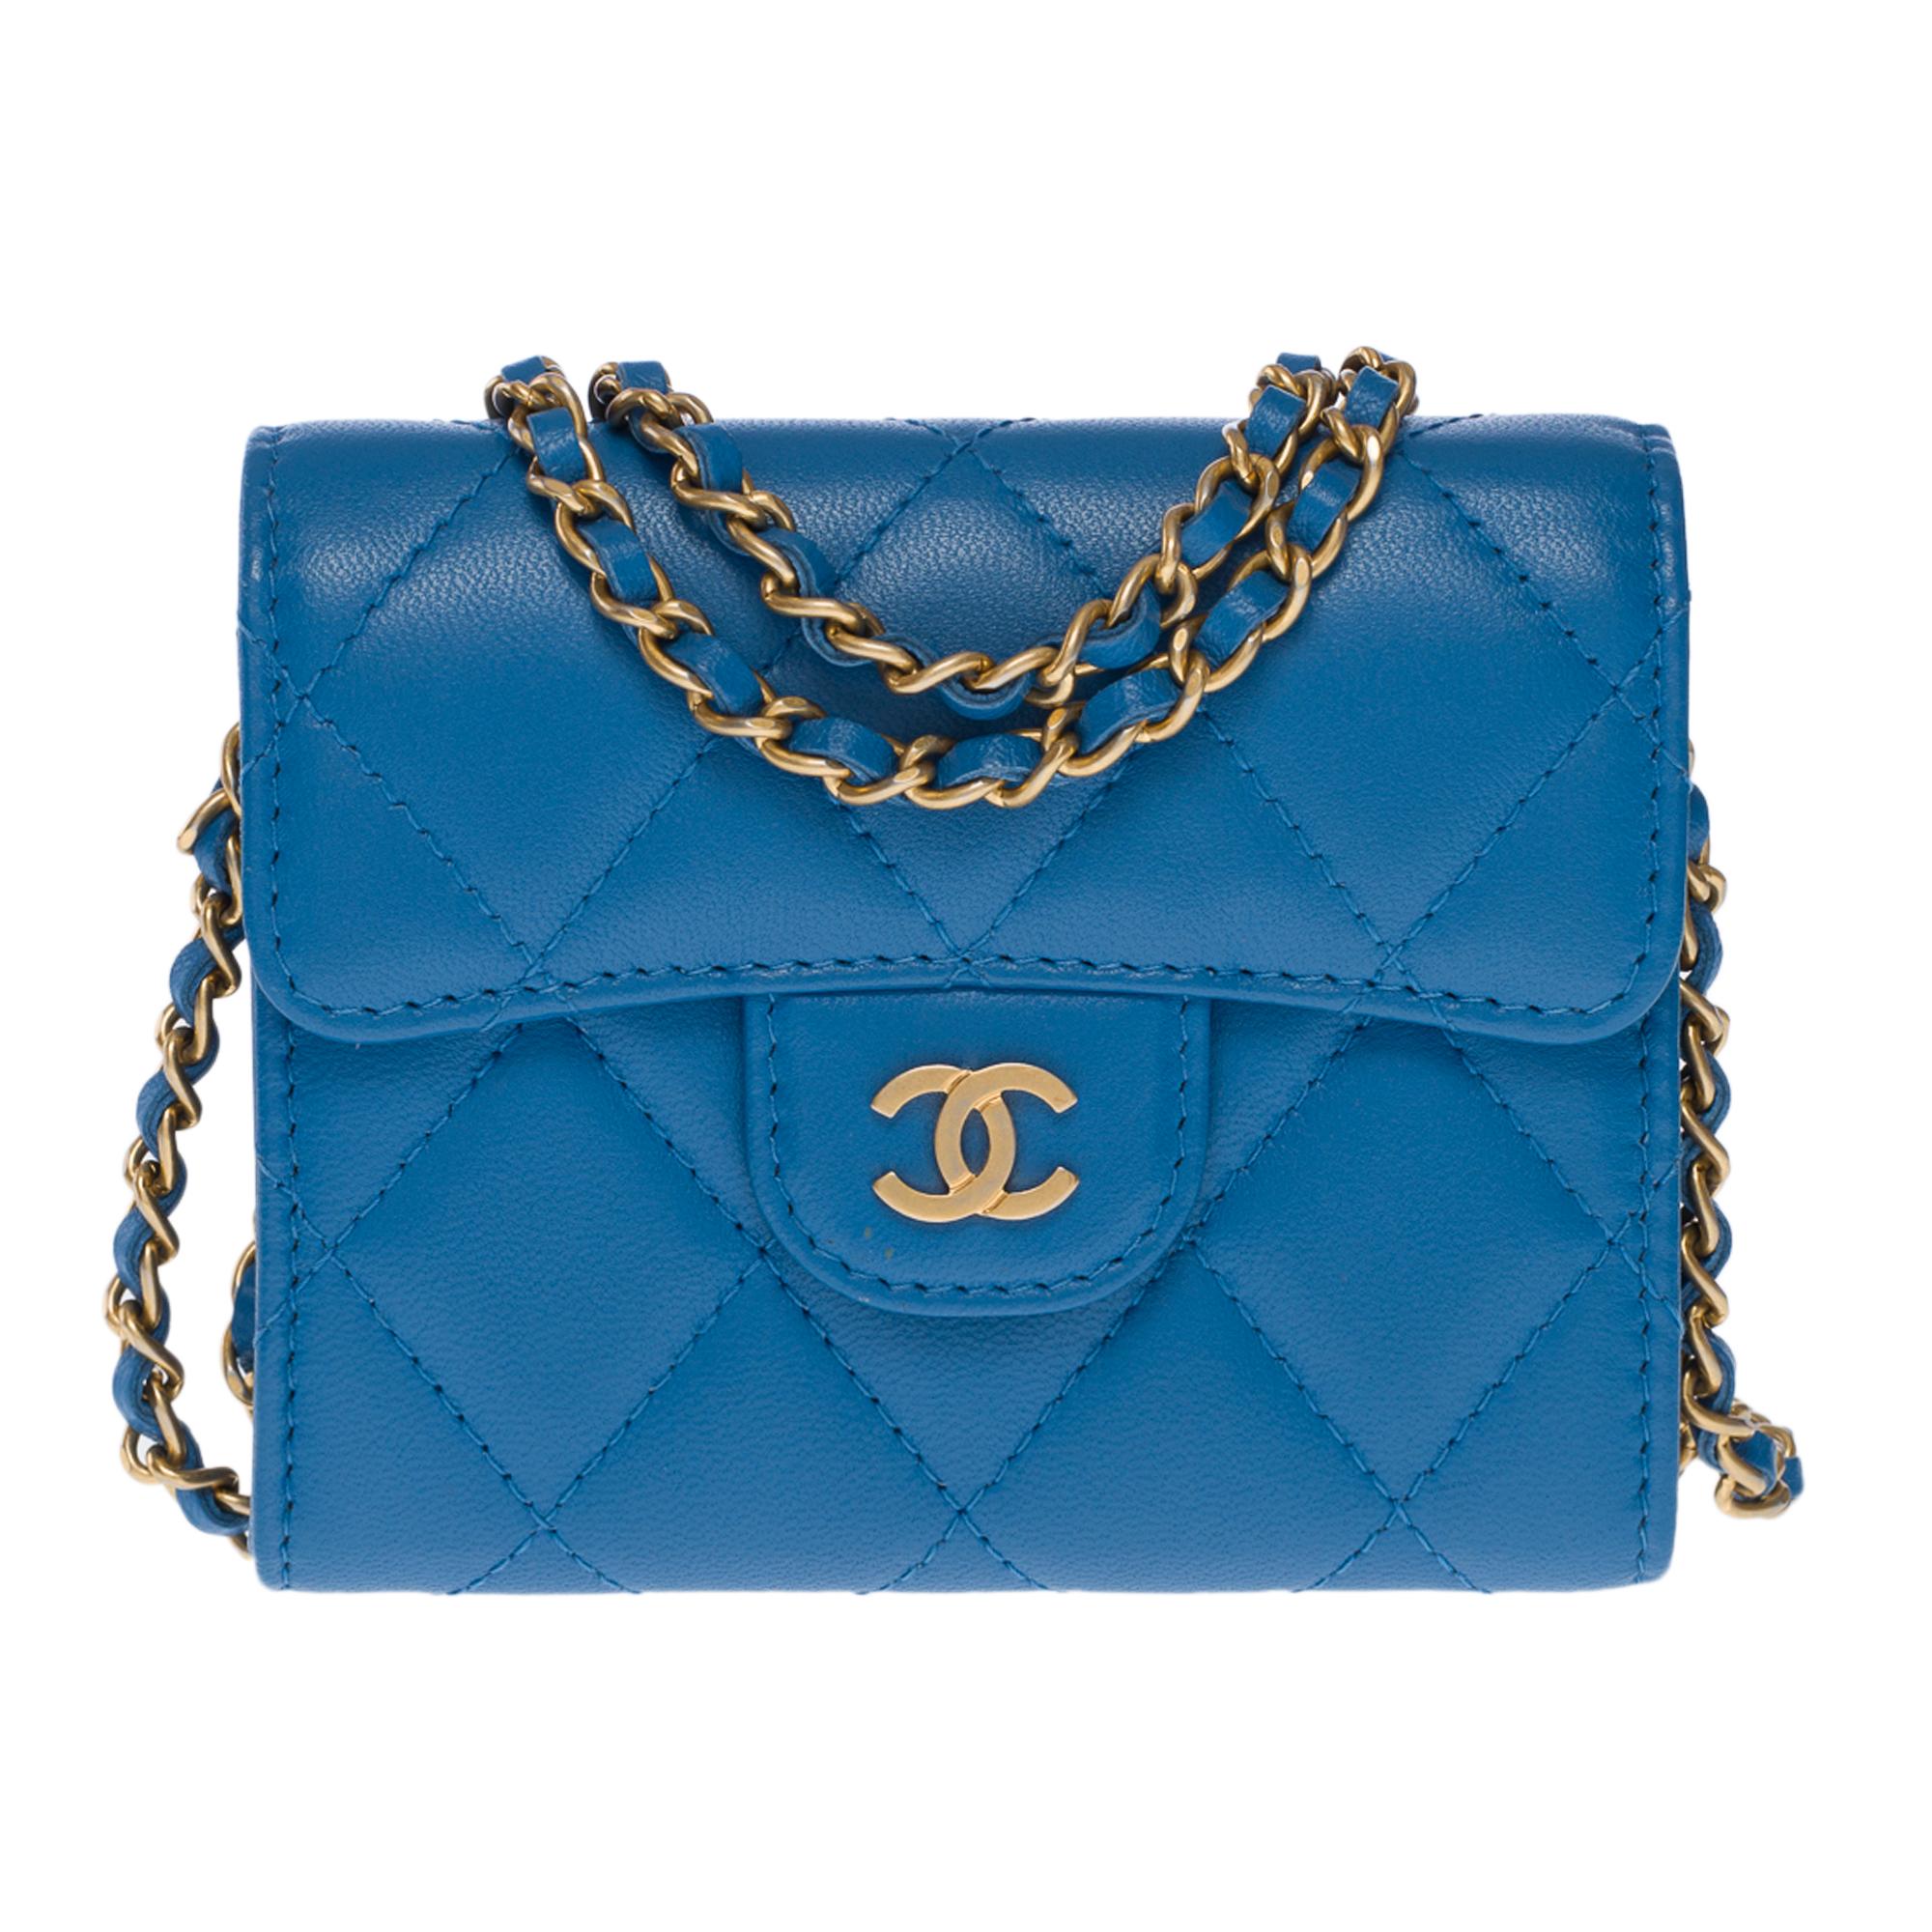 Beautiful Mini Chanel Wallet On Chain (WOC) shoulder bag in blue quilted leather, matte gold antique metal hardware, a chain handle in matte gold antique metal interlaced with blue leather for a shoulder and crossbody support

Closure by flap, CC